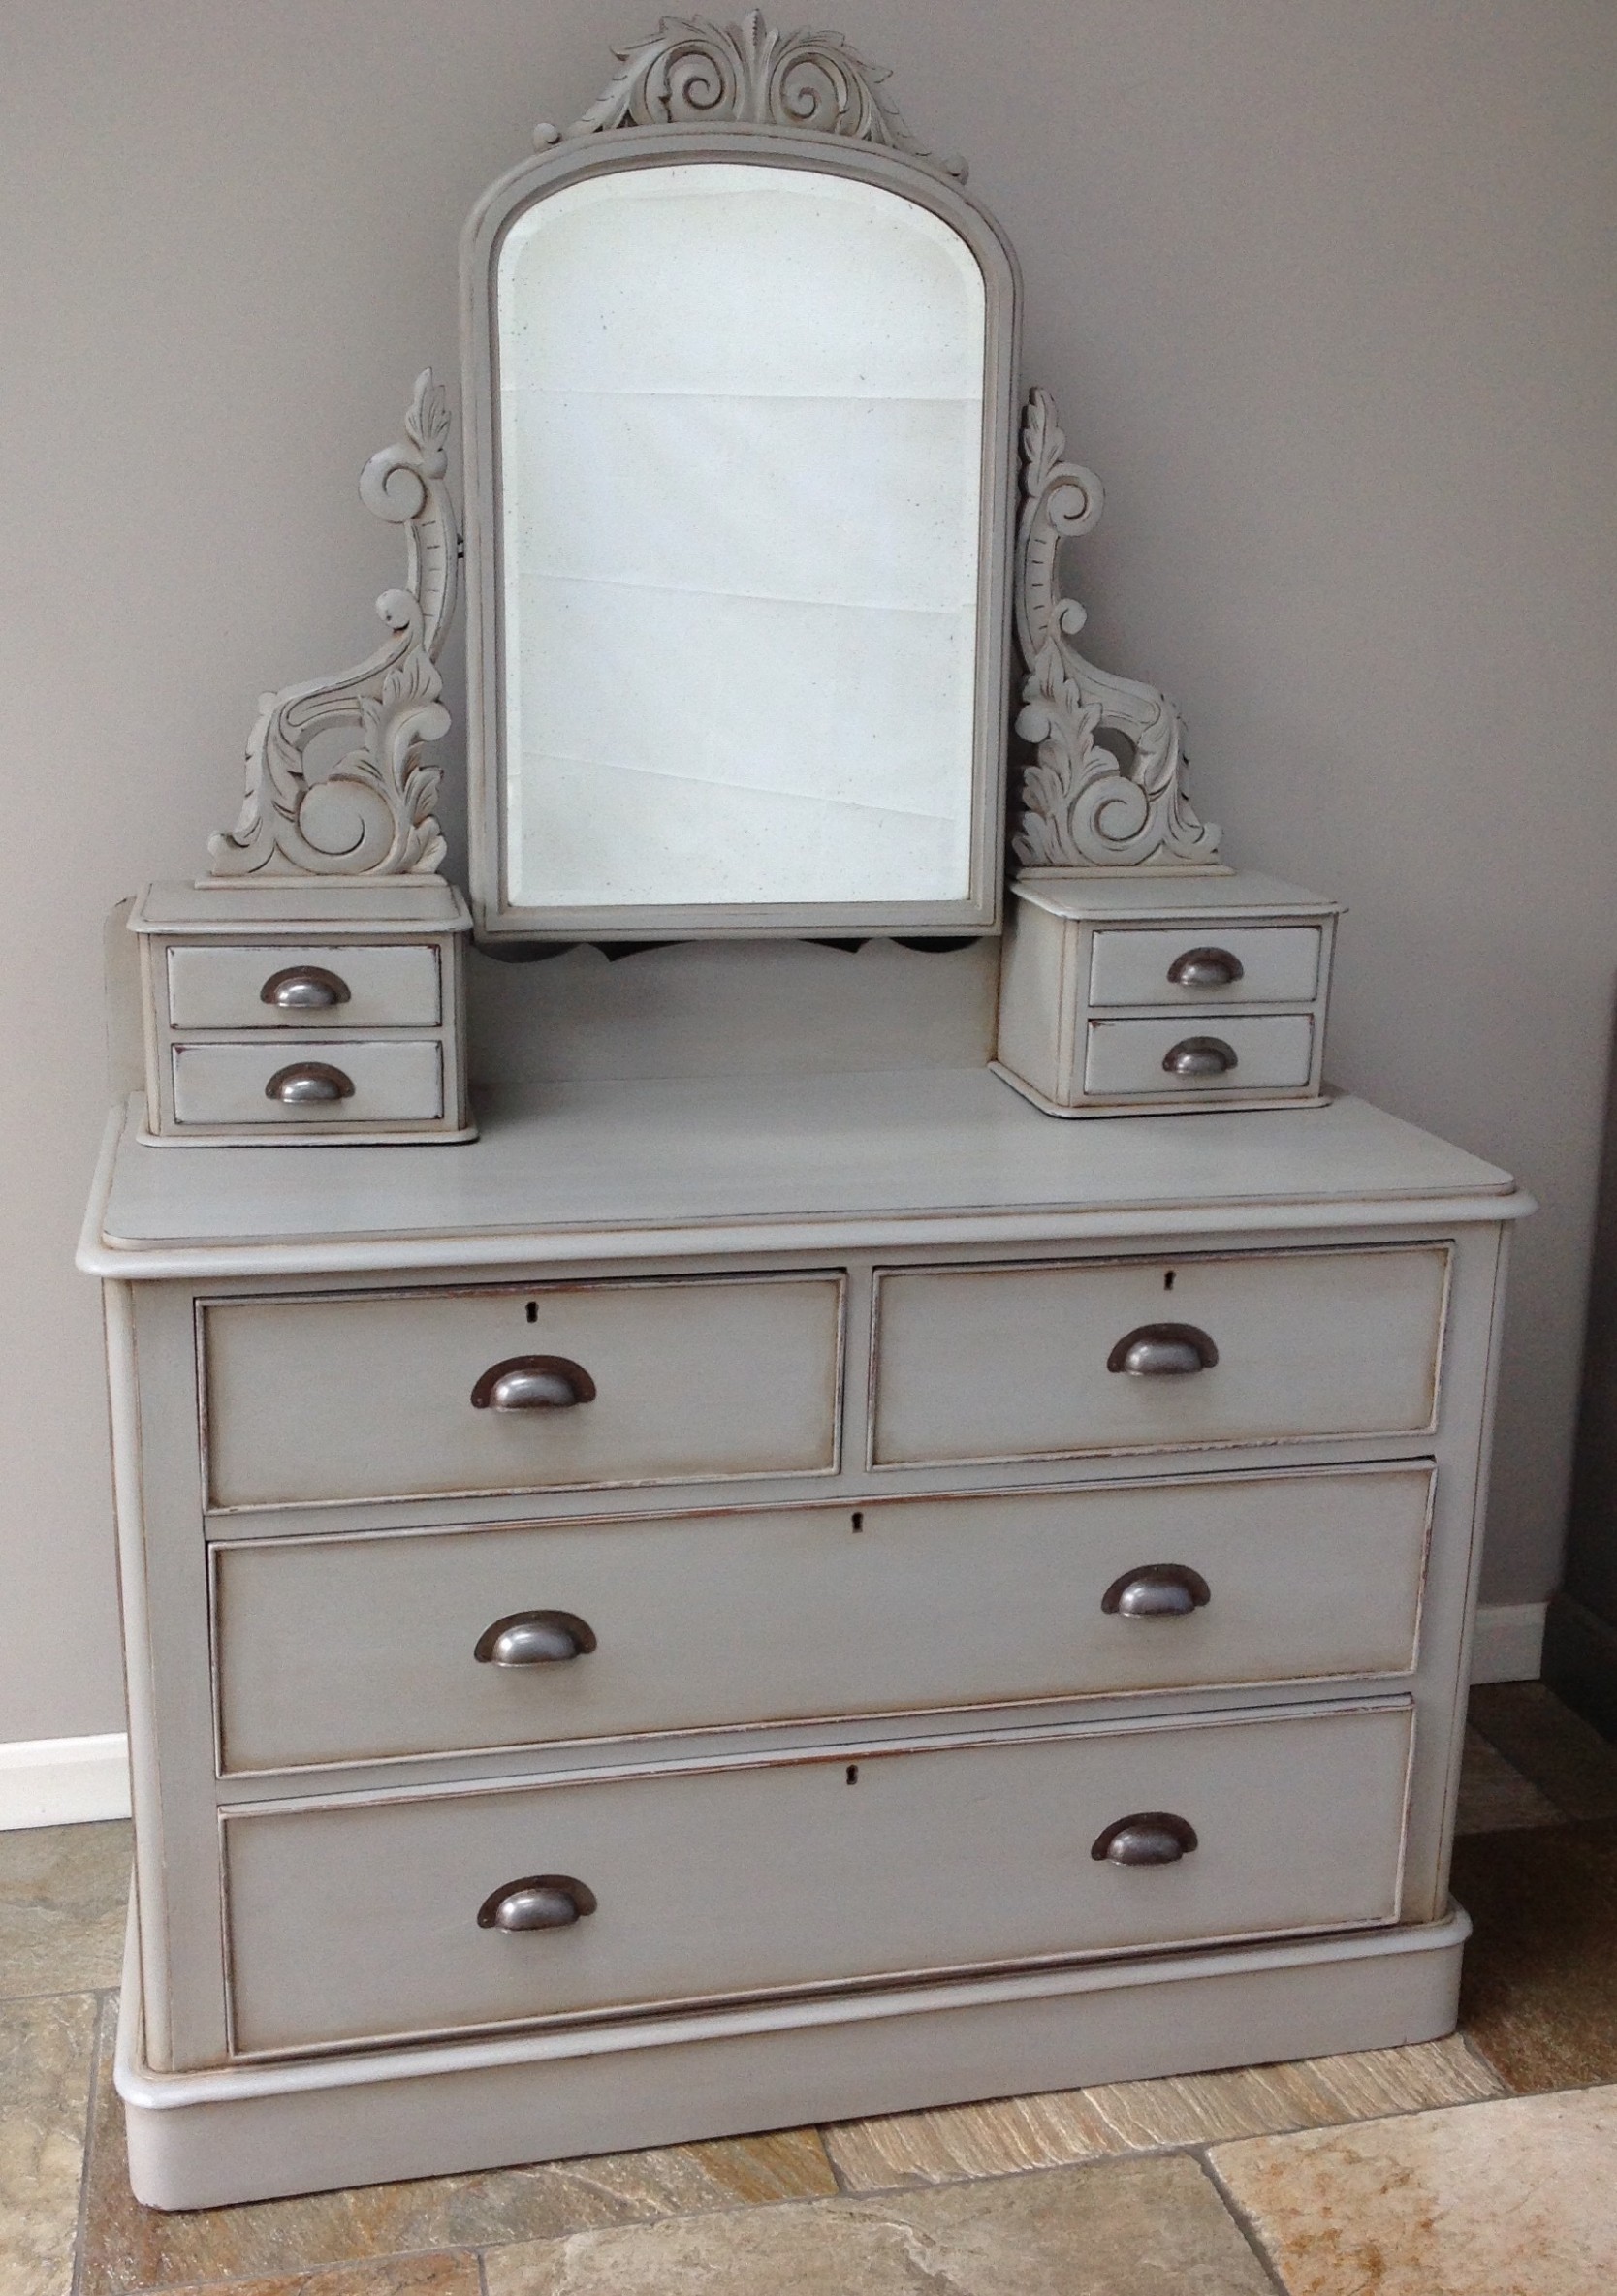 Antique Victorian Dressing Table With Mirror Chest Of Drawers Storage Cupboard Painted Grey Annie Sloan Chalk Paint Annie Sloan Chalk Paint Gray